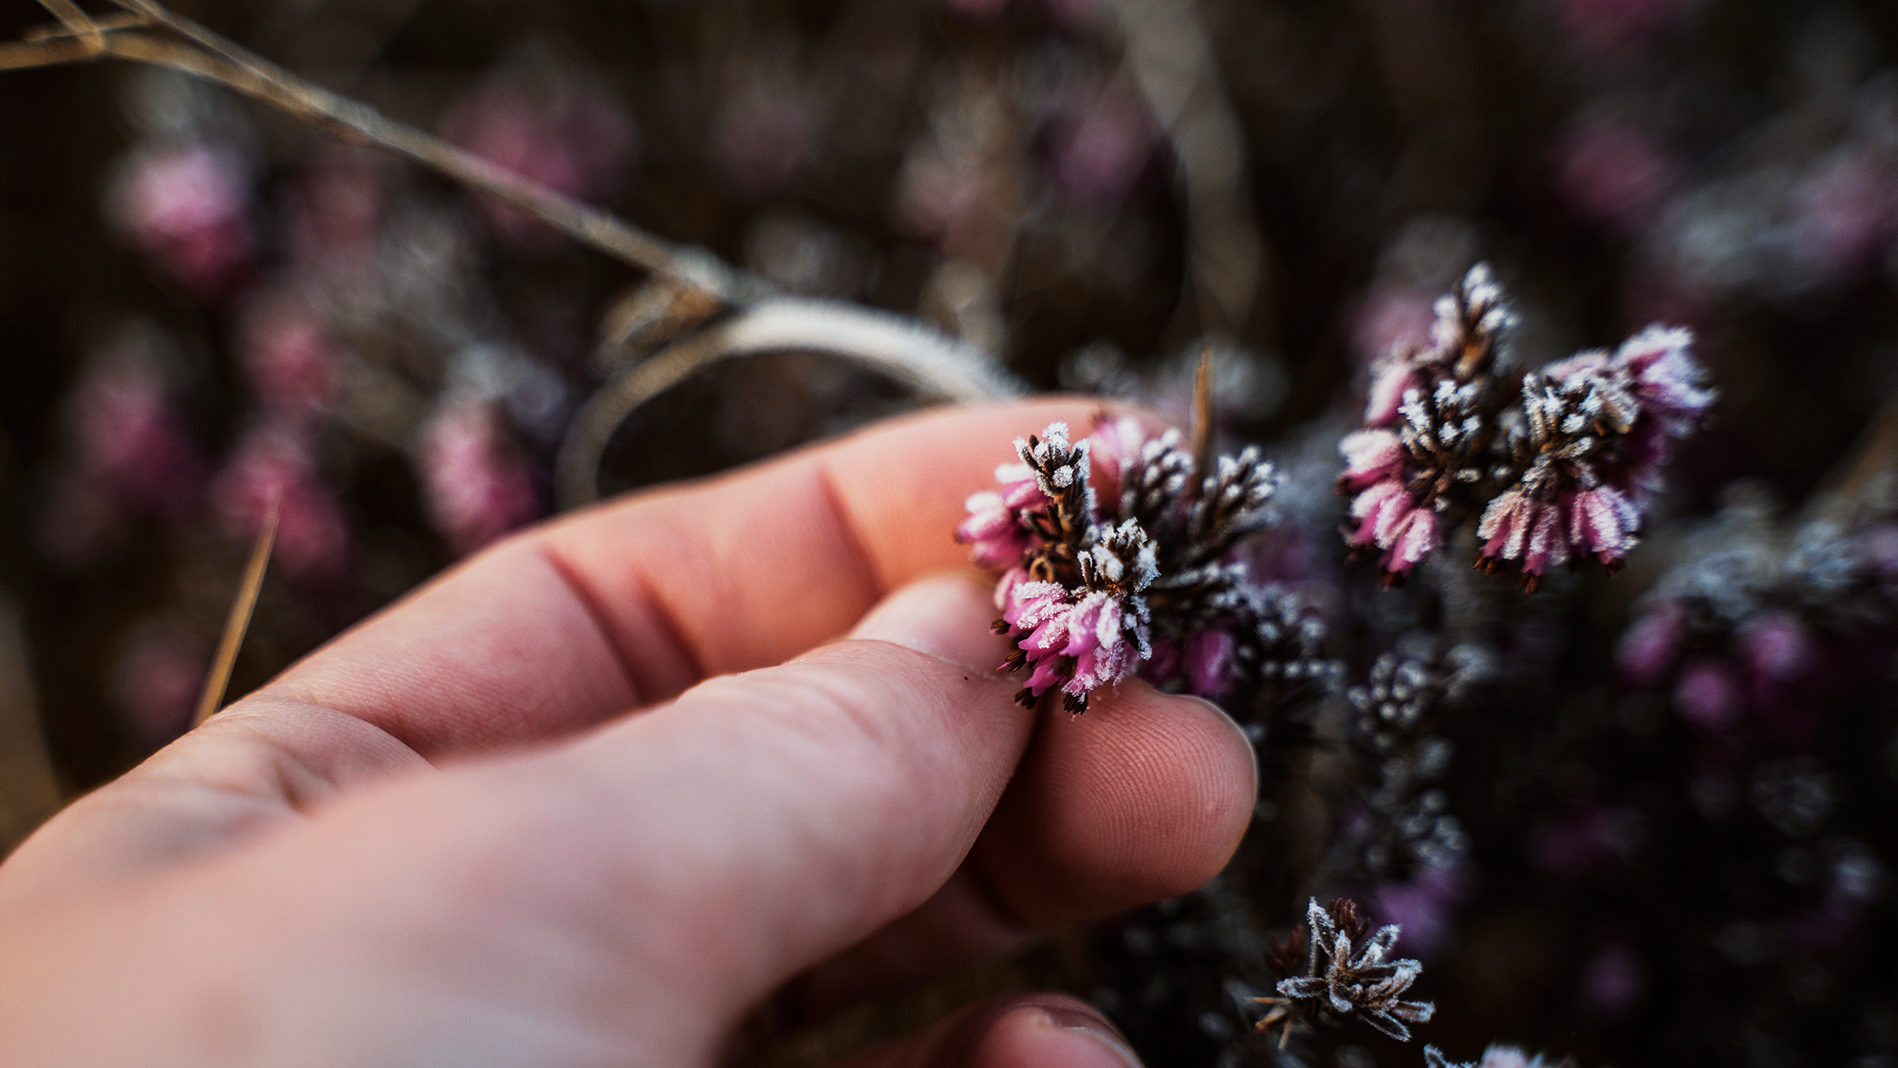 A hand touching frozen heather blossom, mindfully present in nature.